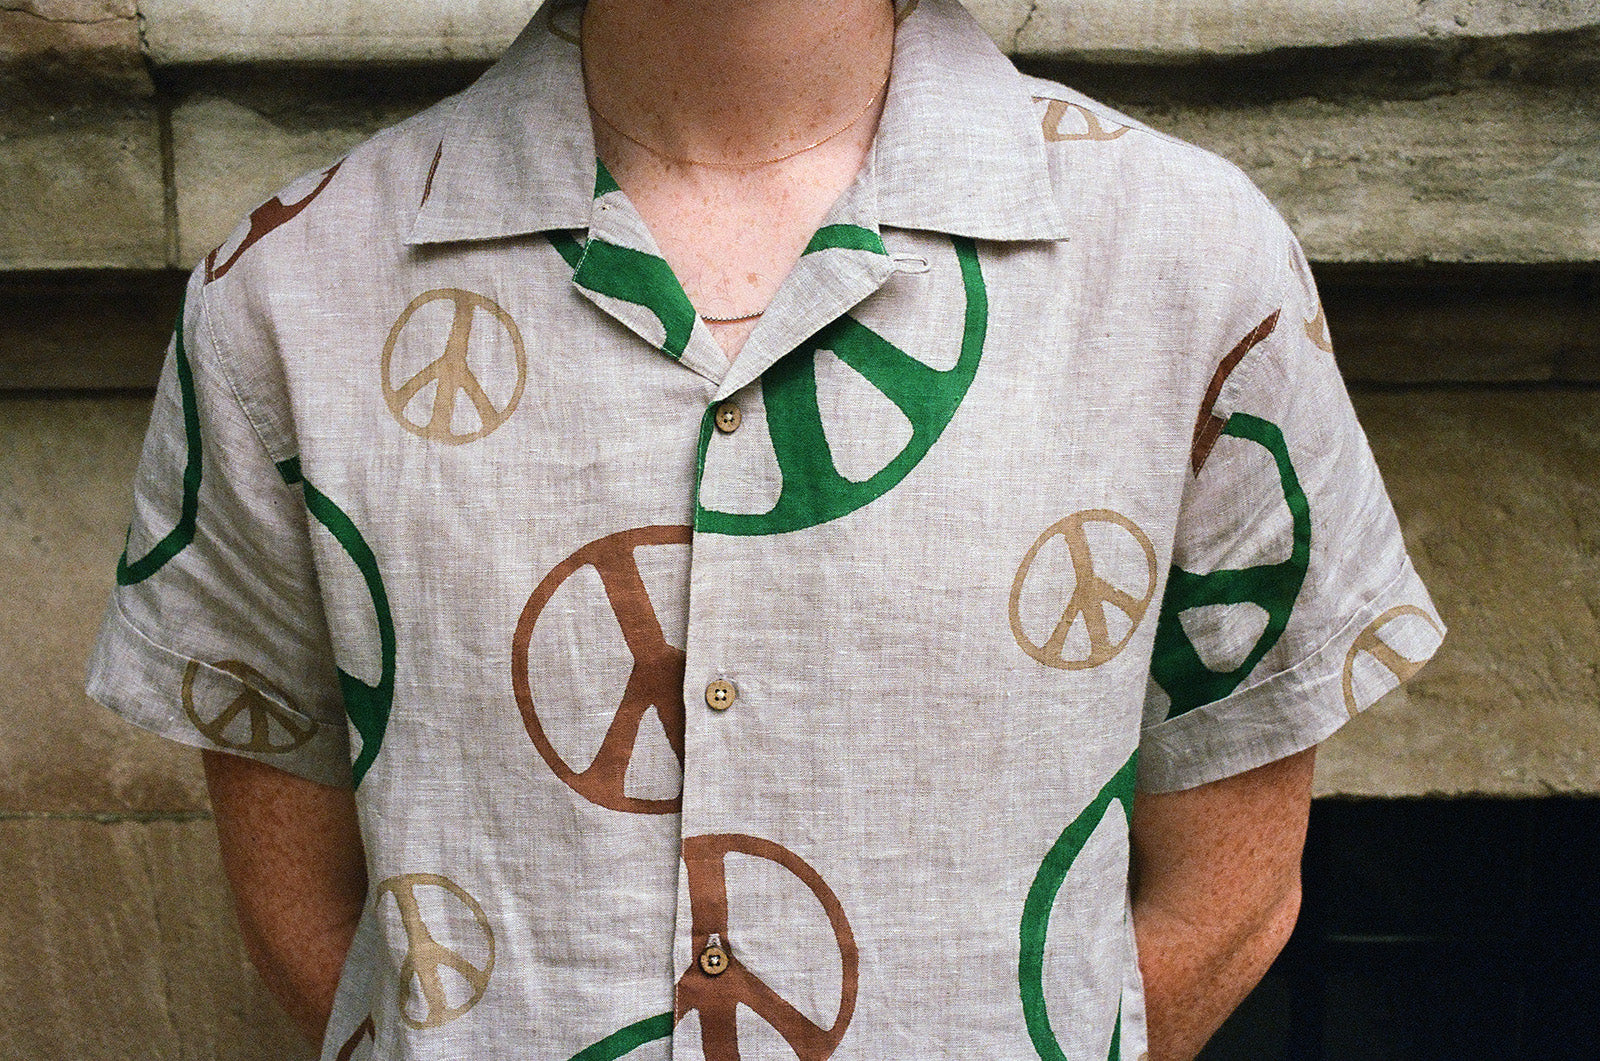 A close up image of a tan shirt with various colored peace signs printed on it. 